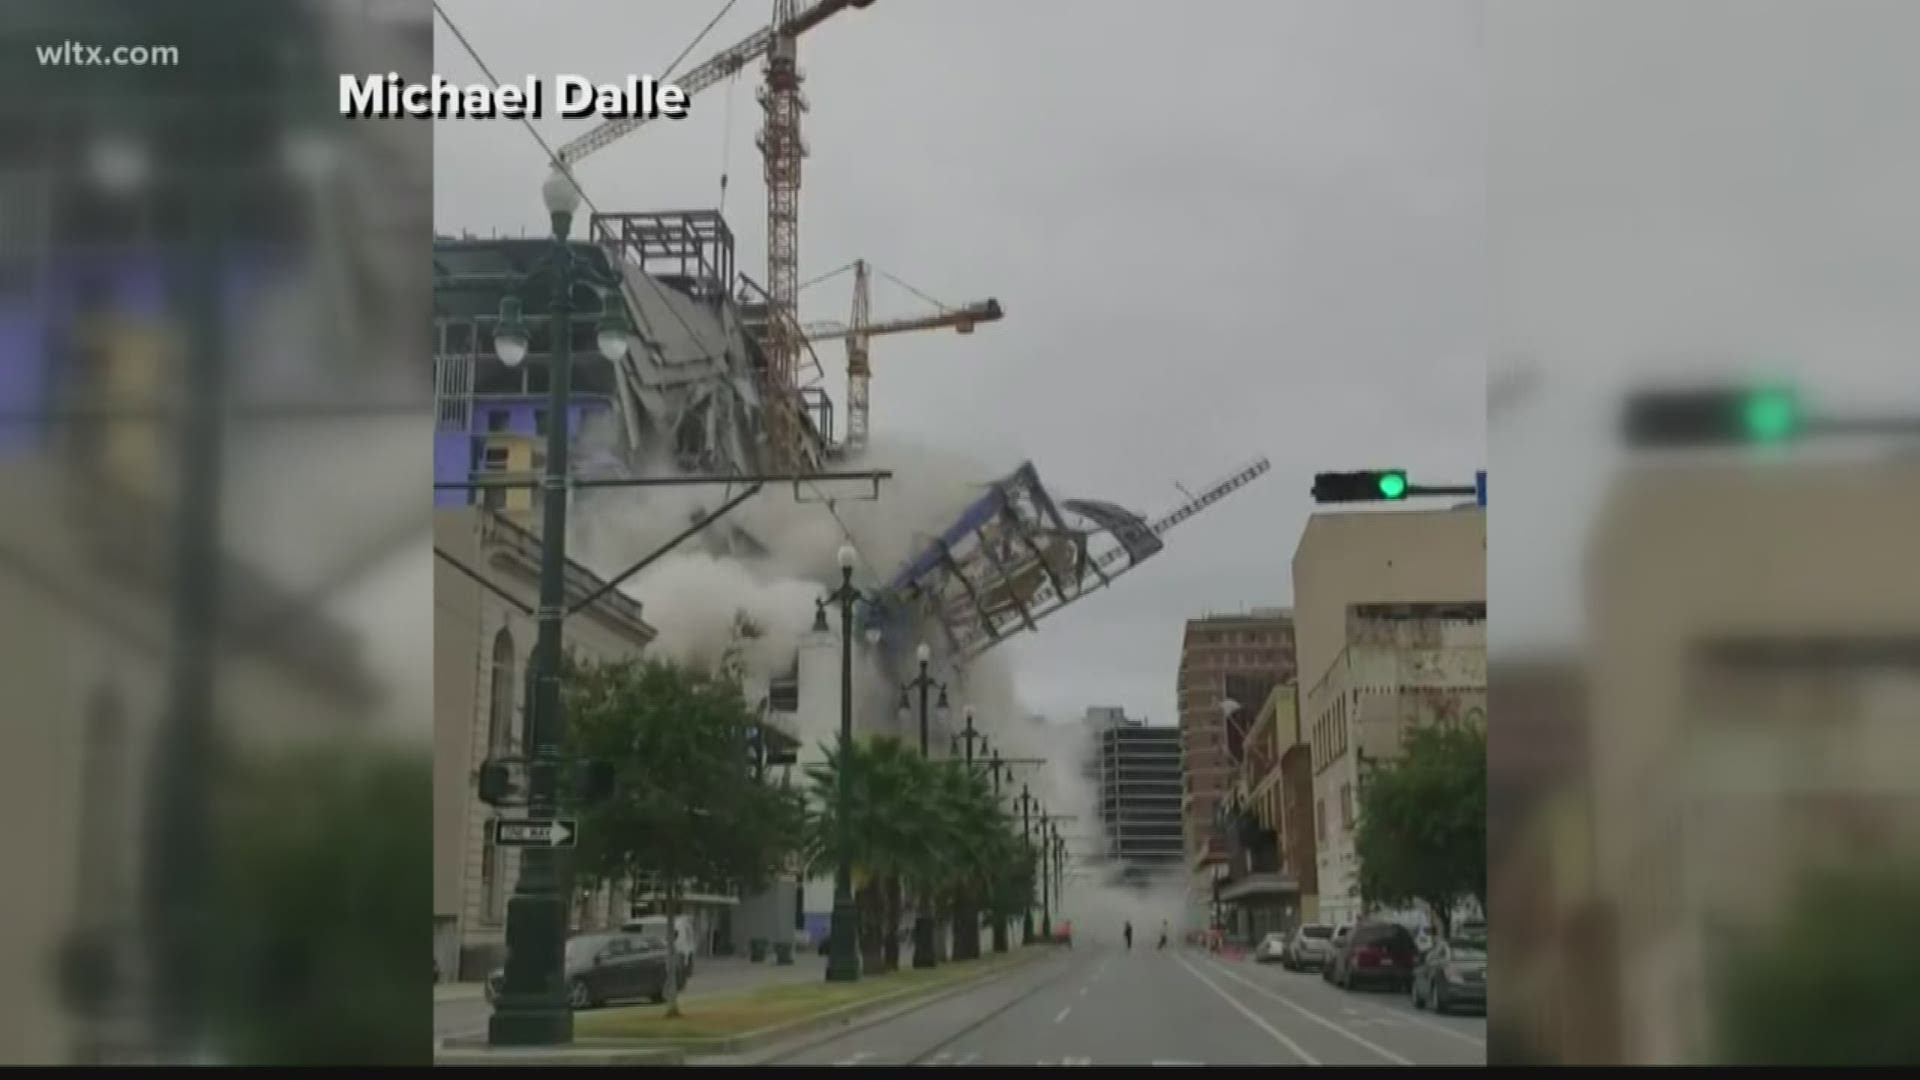 A Hard Rock Hotel, which had been under construction for the last several months in downtown New Orleans, has collapsed.